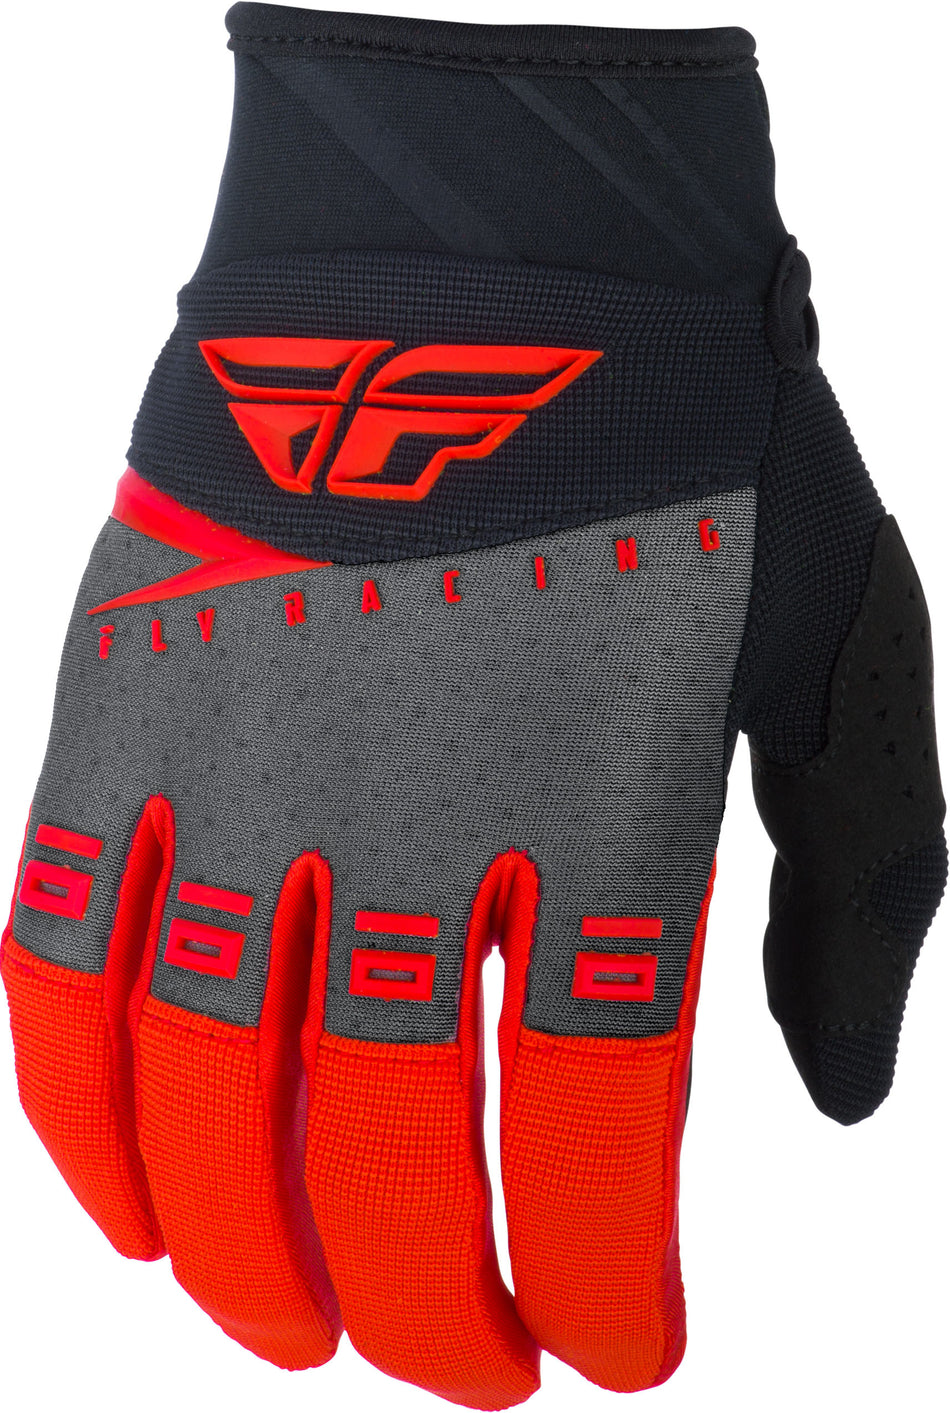 FLY RACING F-16 Gloves Red/Black Grey Sz 09 372-91209